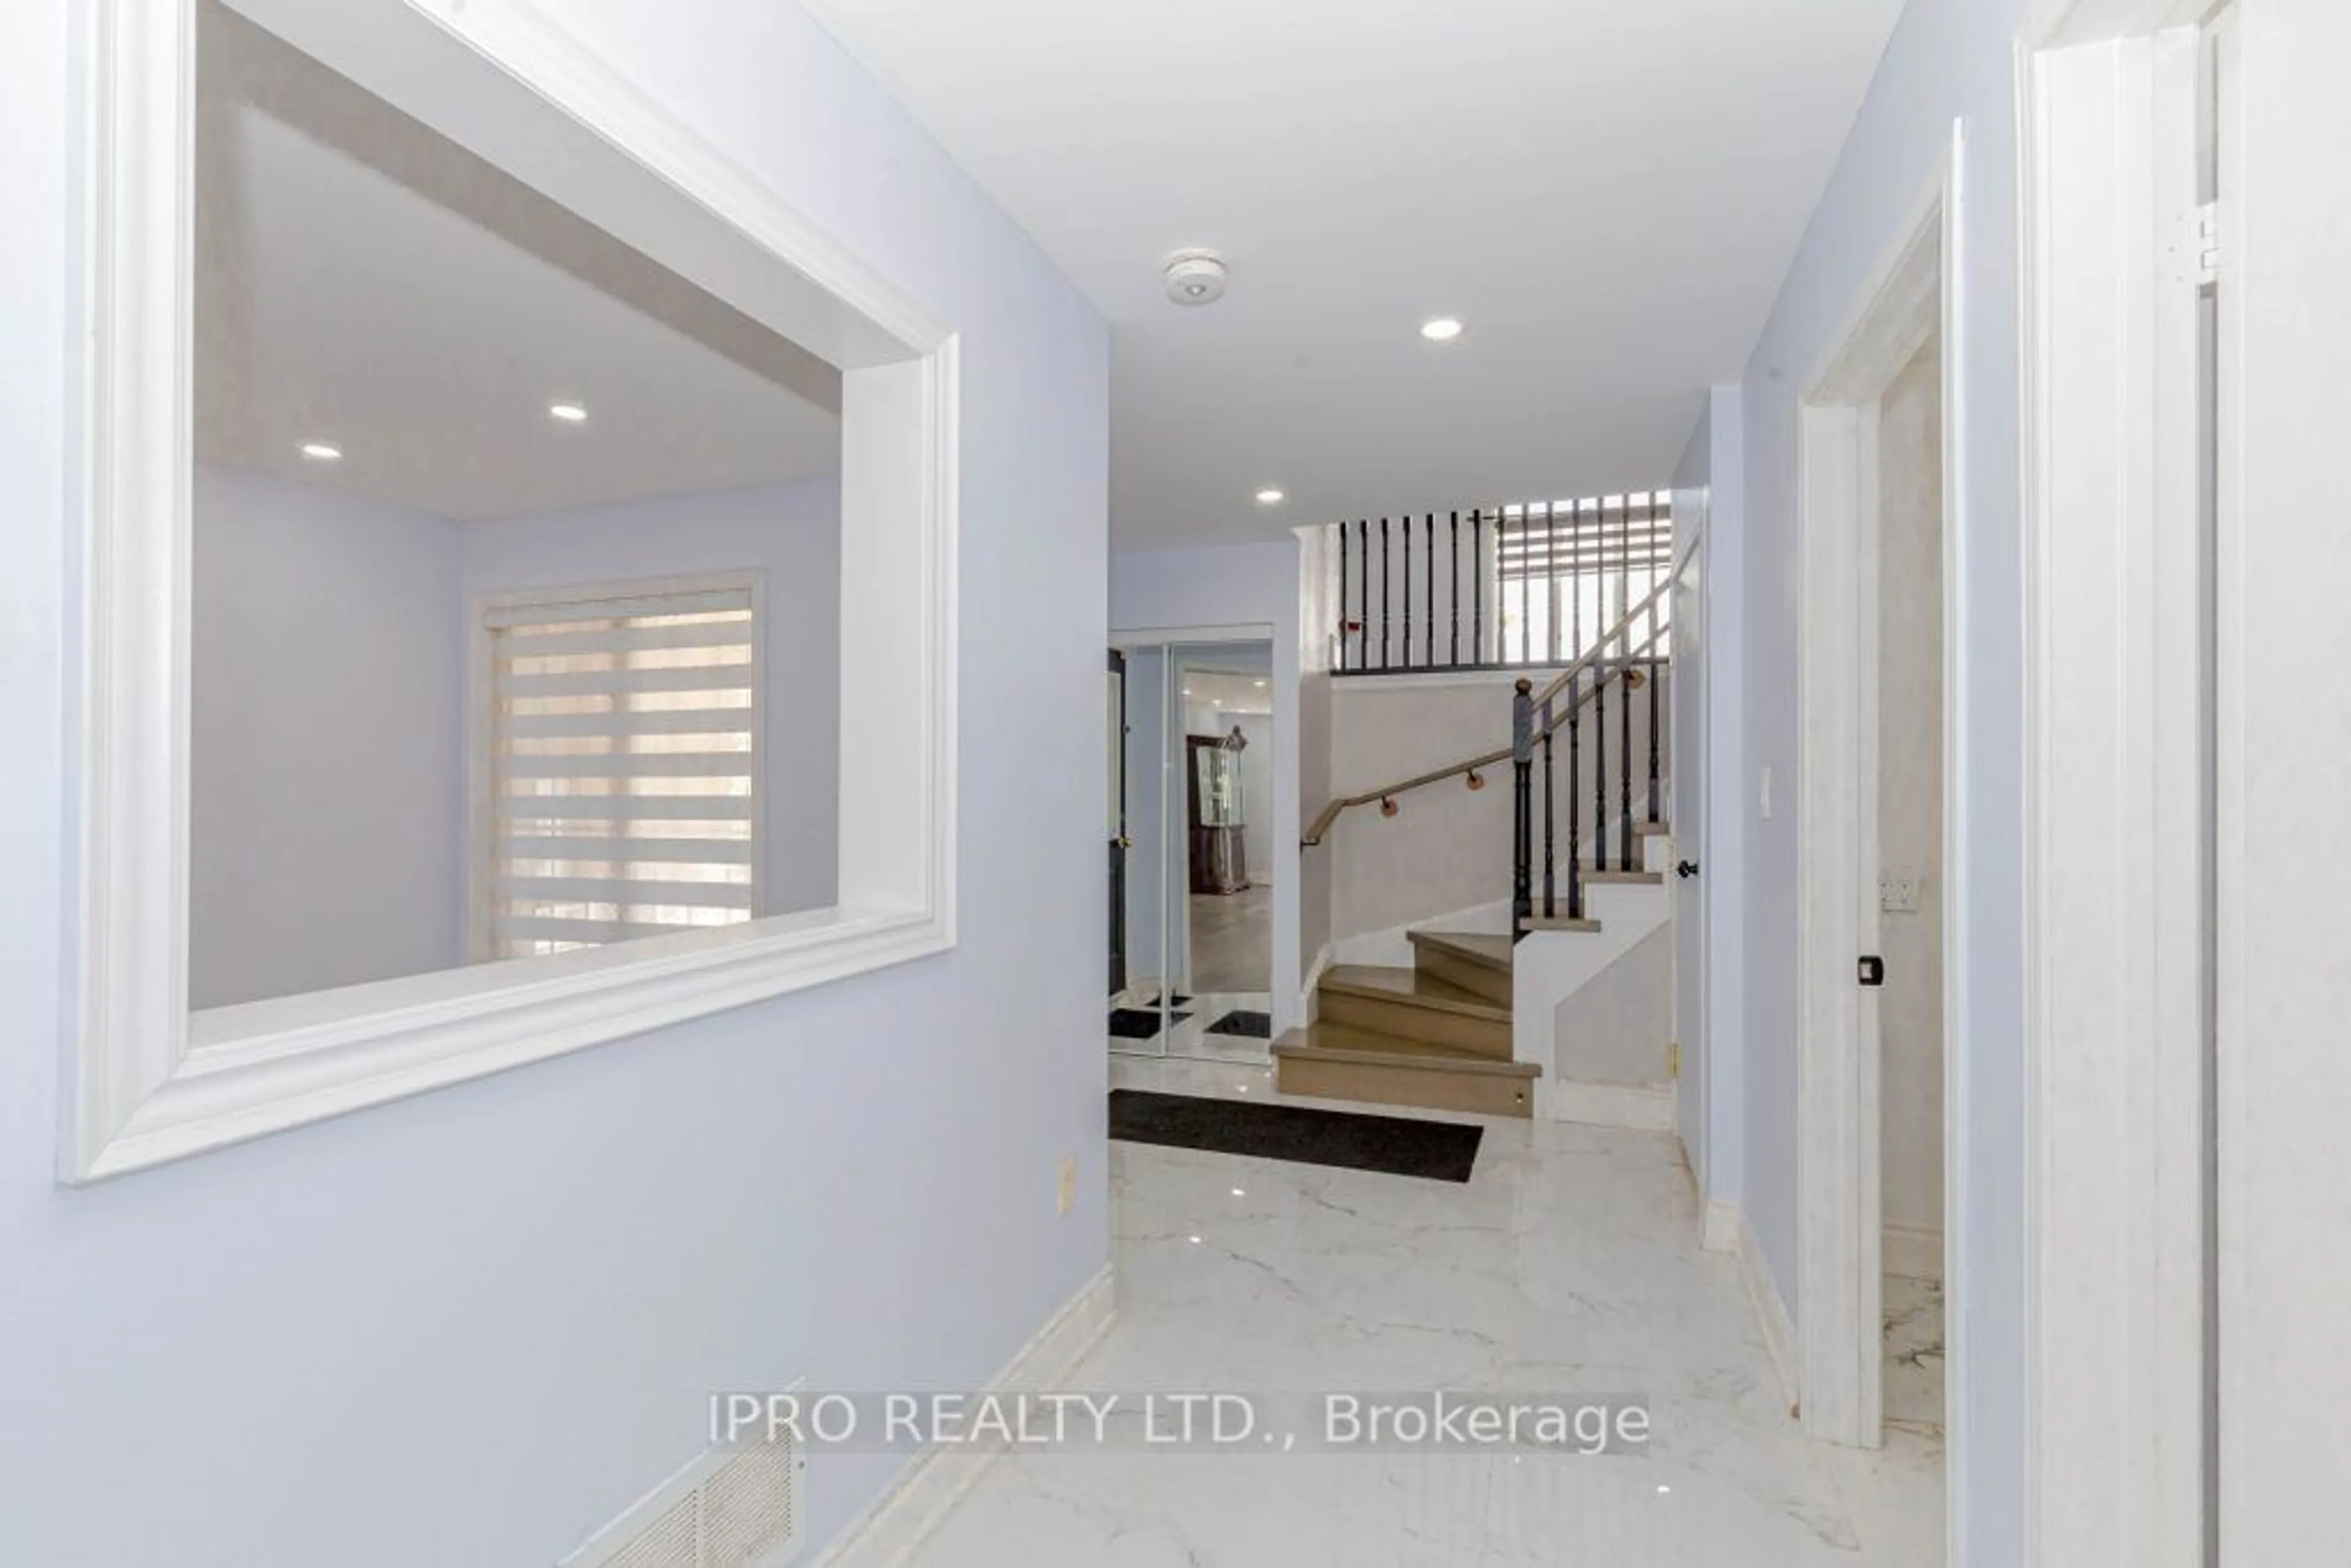 Indoor entryway for 3833 Althorpe Circ, Mississauga Ontario L5N 7G3